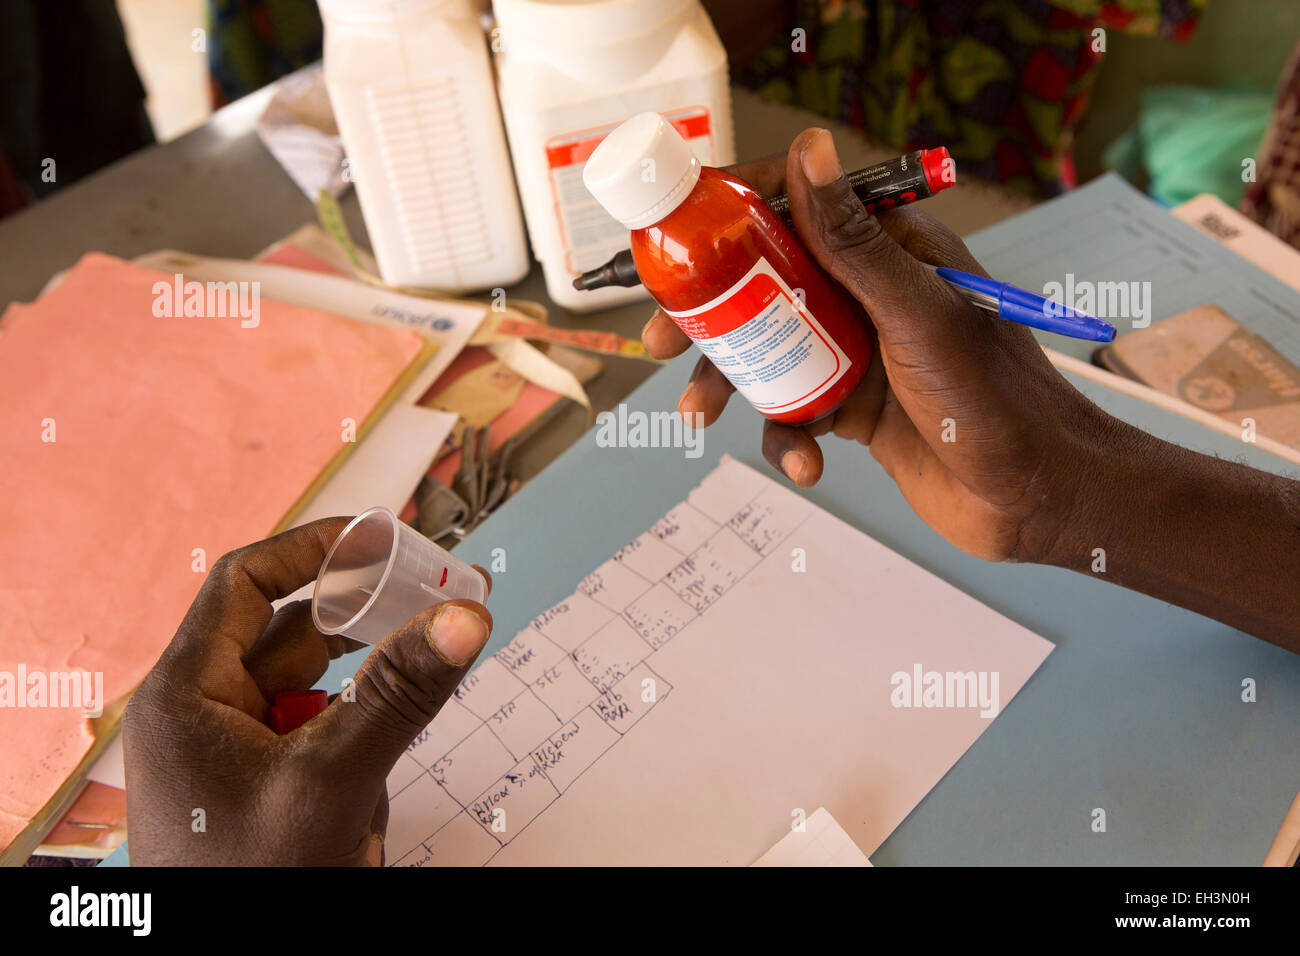 KOMOBANGAU, TILLABERI PROVINCE, NIGER, 15th May 2012: A doctor dispenses medicine to malnourished children and their mothers at the local health centre. Stock Photo